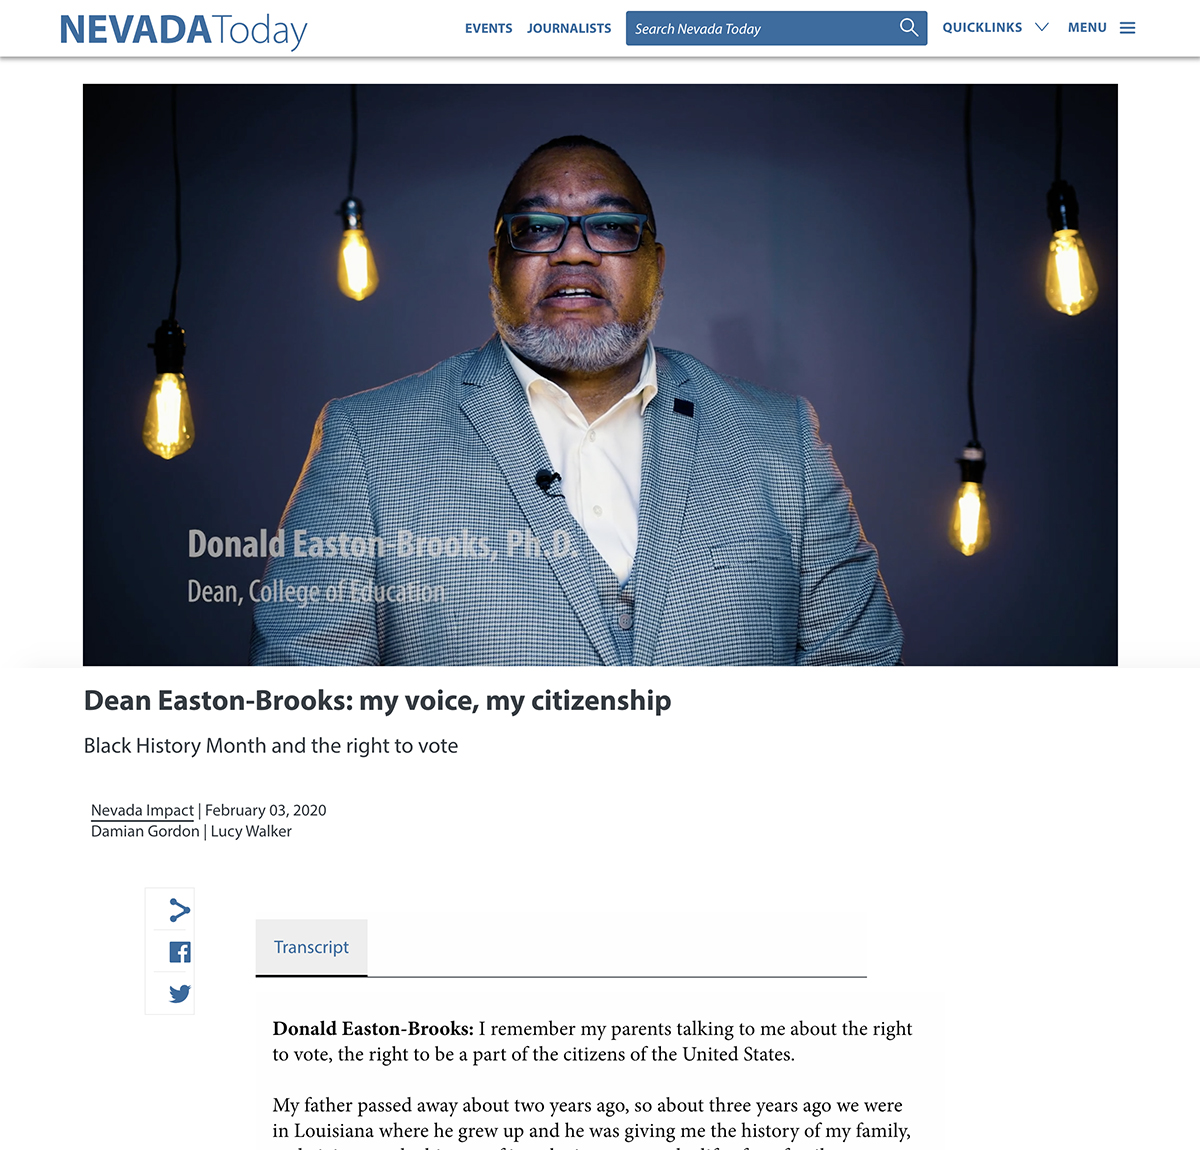 NevadaToday Video Feature Article Design and Layout